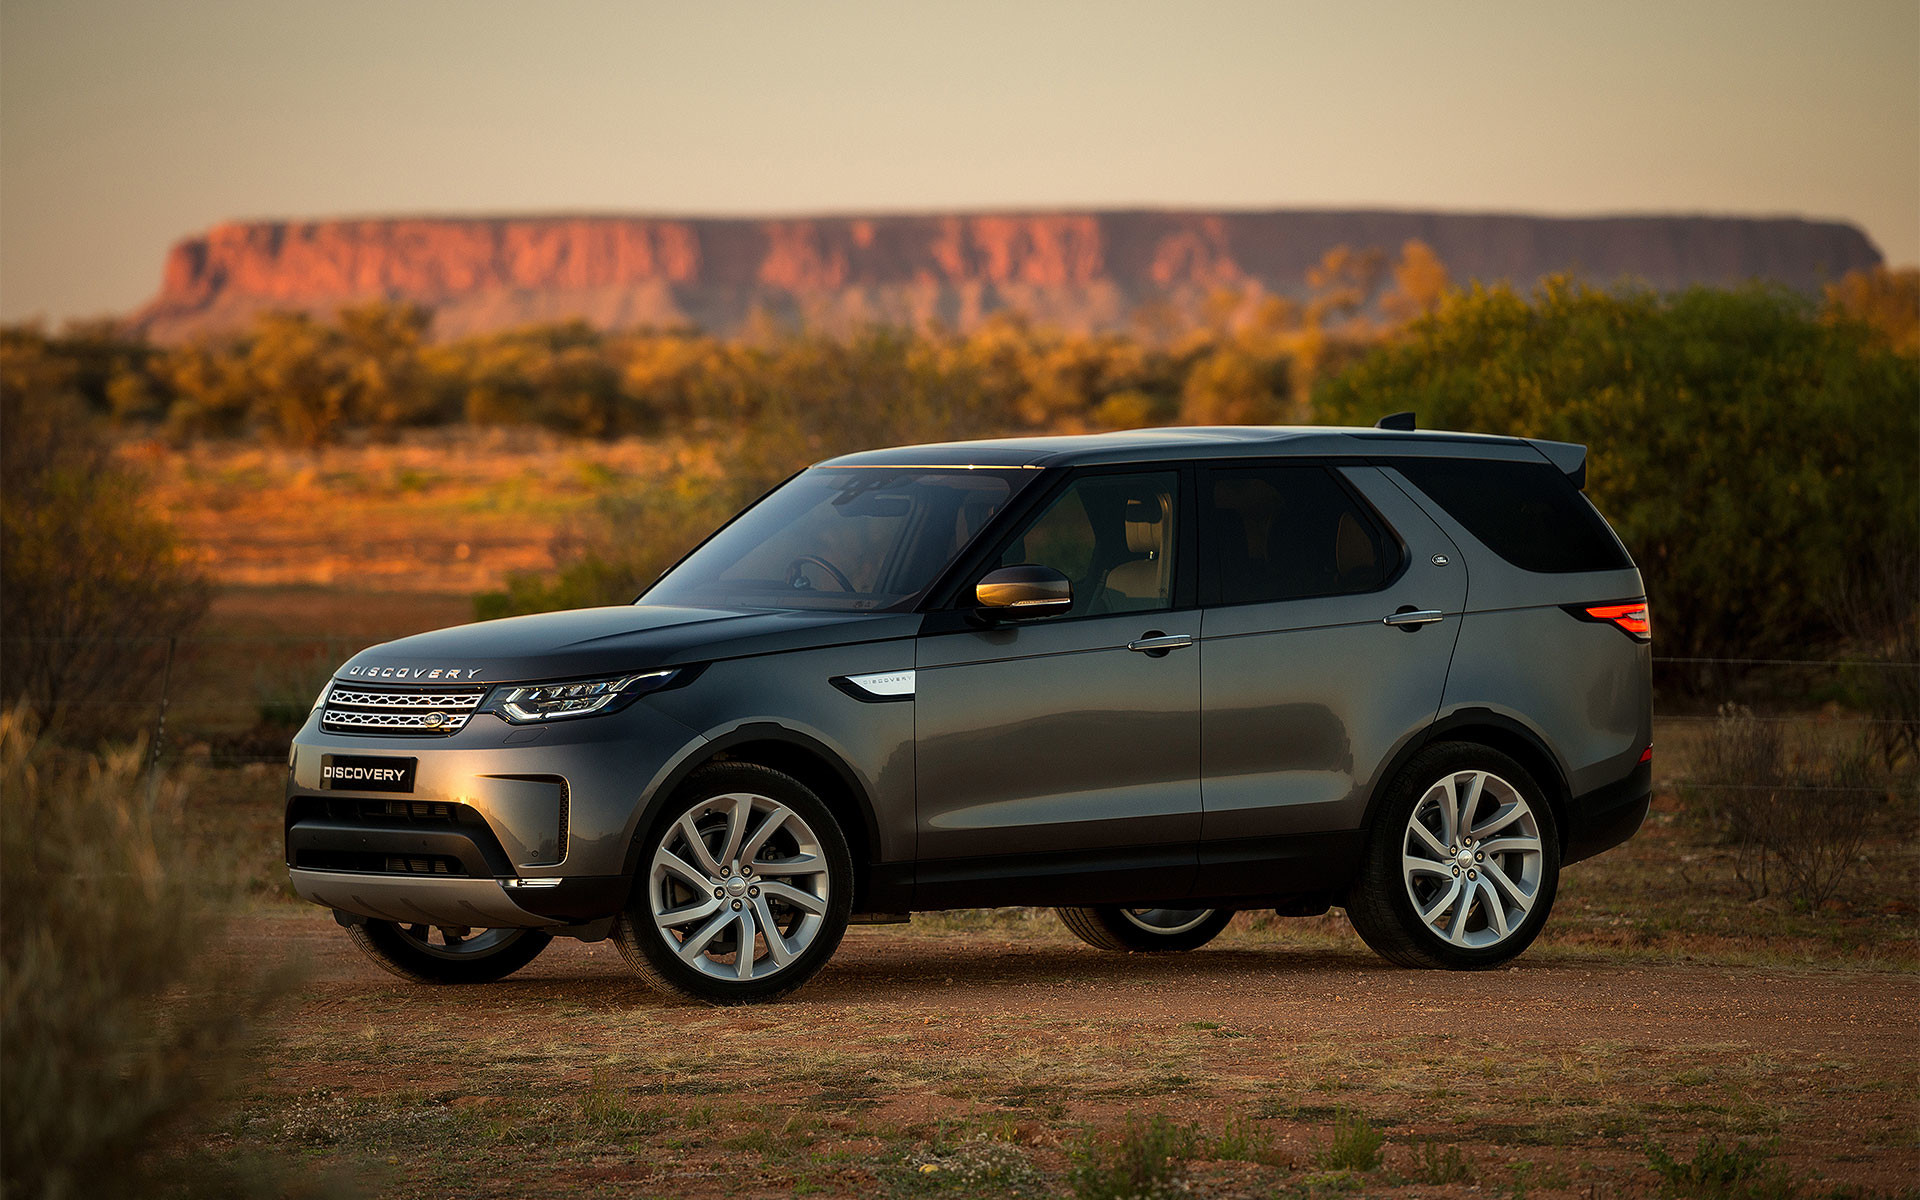 Land Rover Discovery 5. Фото: © JAGUAR LAND ROVER LIMITED